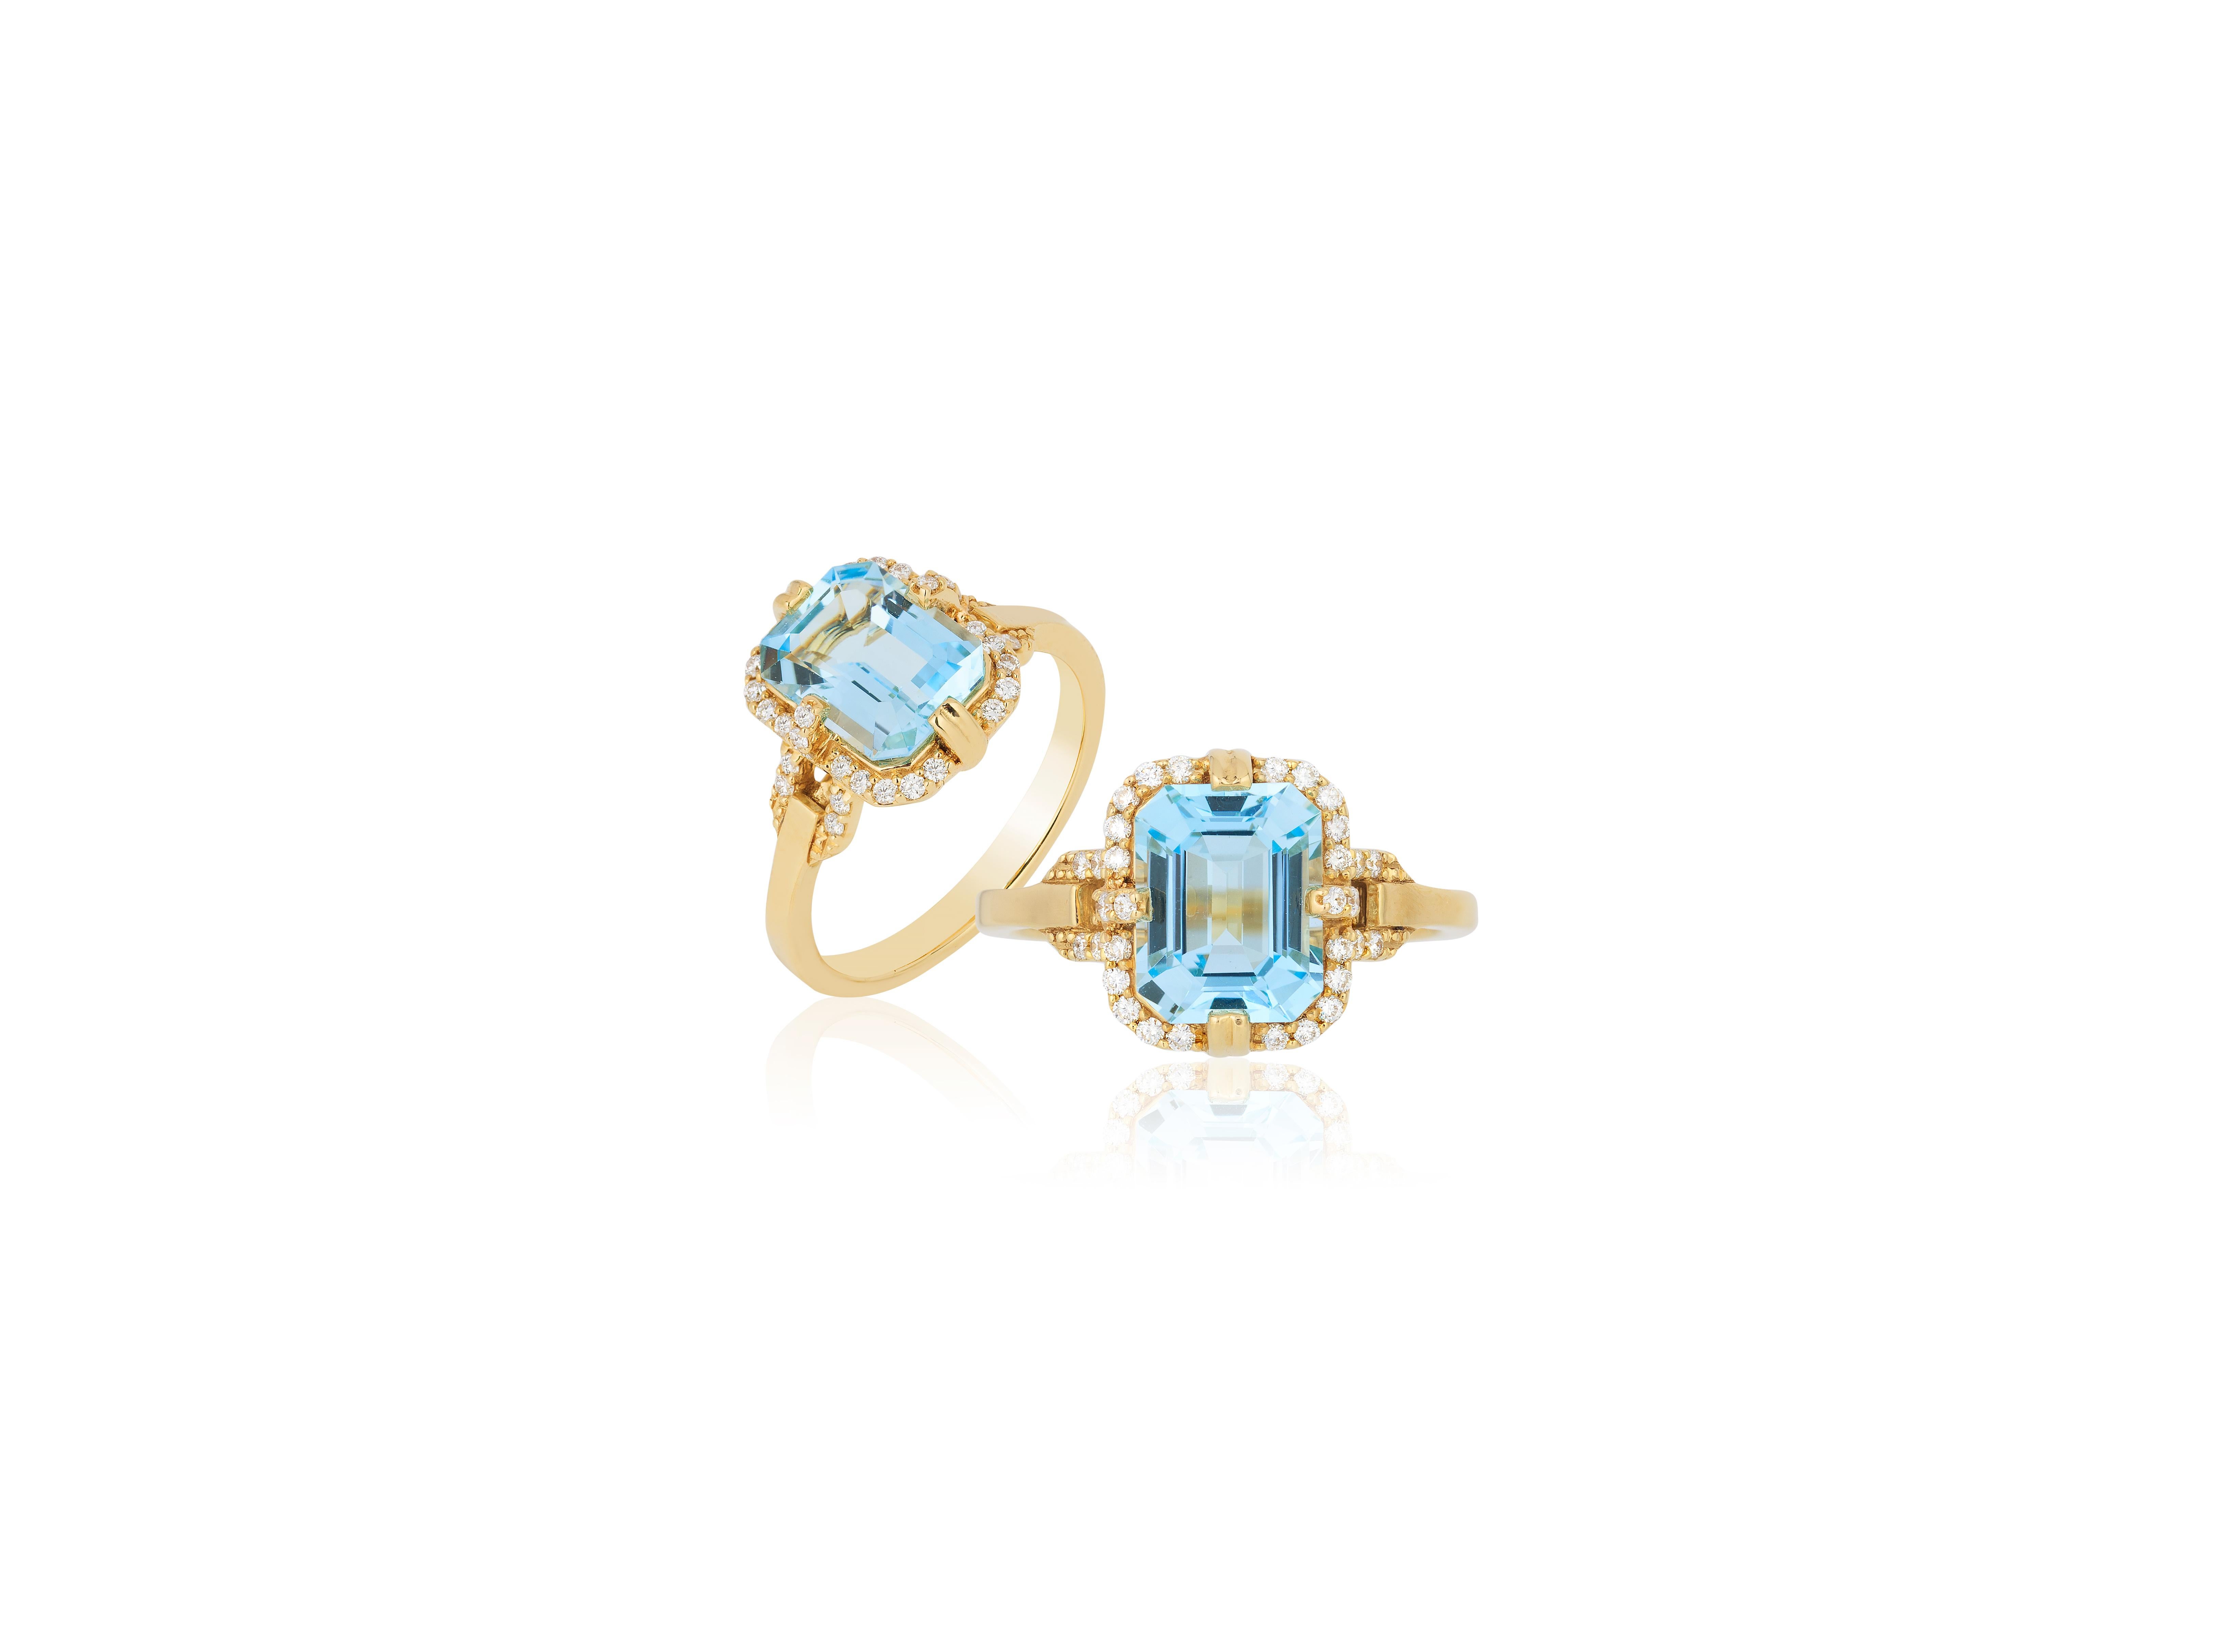 Blue Topaz Emerald Cut Ring in 18K Yellow Gold with Diamonds from 'Gossip' Collection. Like any good piece of gossip, this collection carries a hint of shock value. They will have everyone in suspense about what Goshwara will do next.

* Gemstone